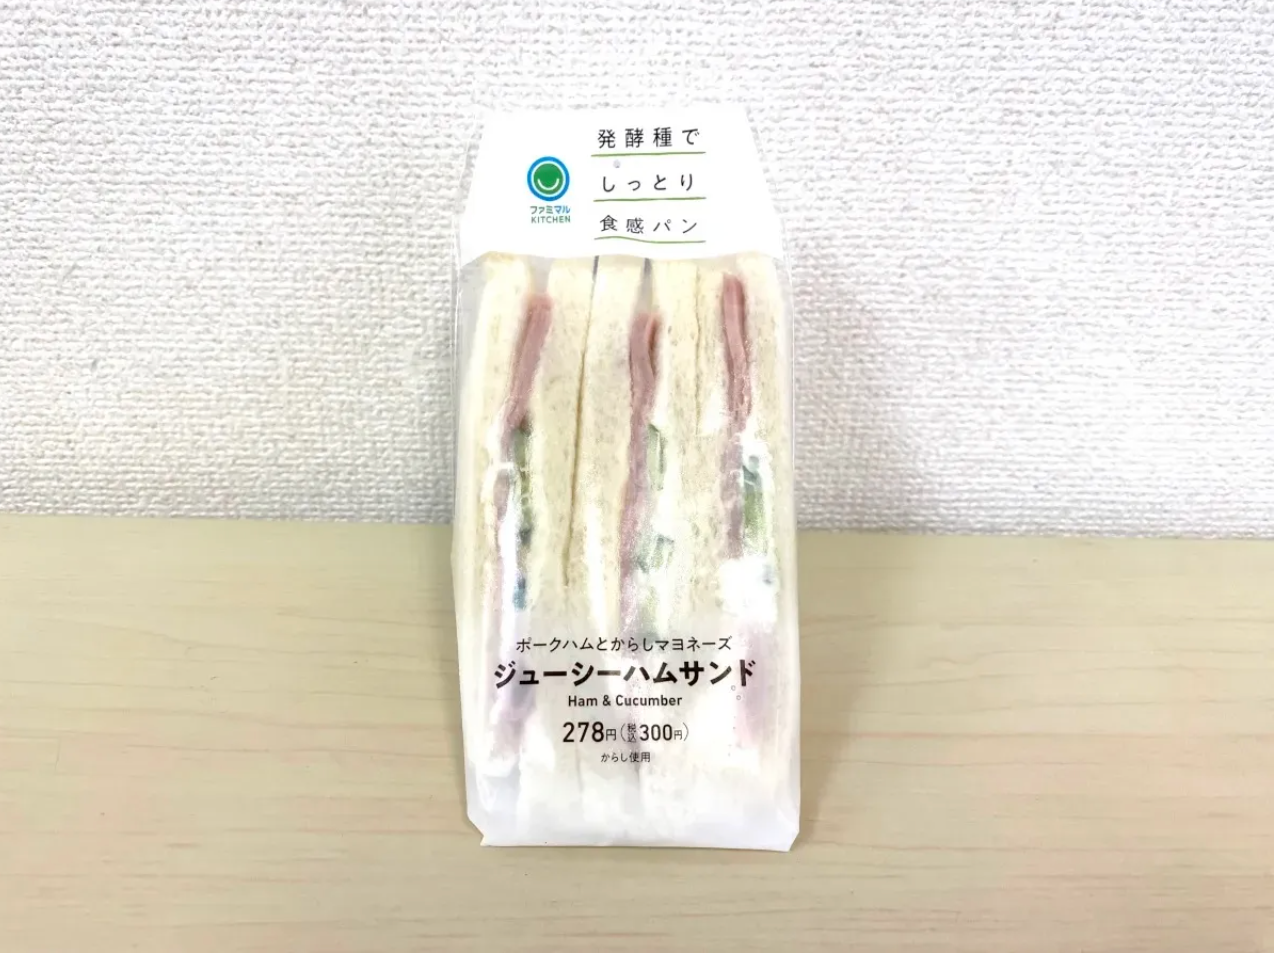 Japan's one-person sandwich press, a “God item” for solo diners, sells out  online